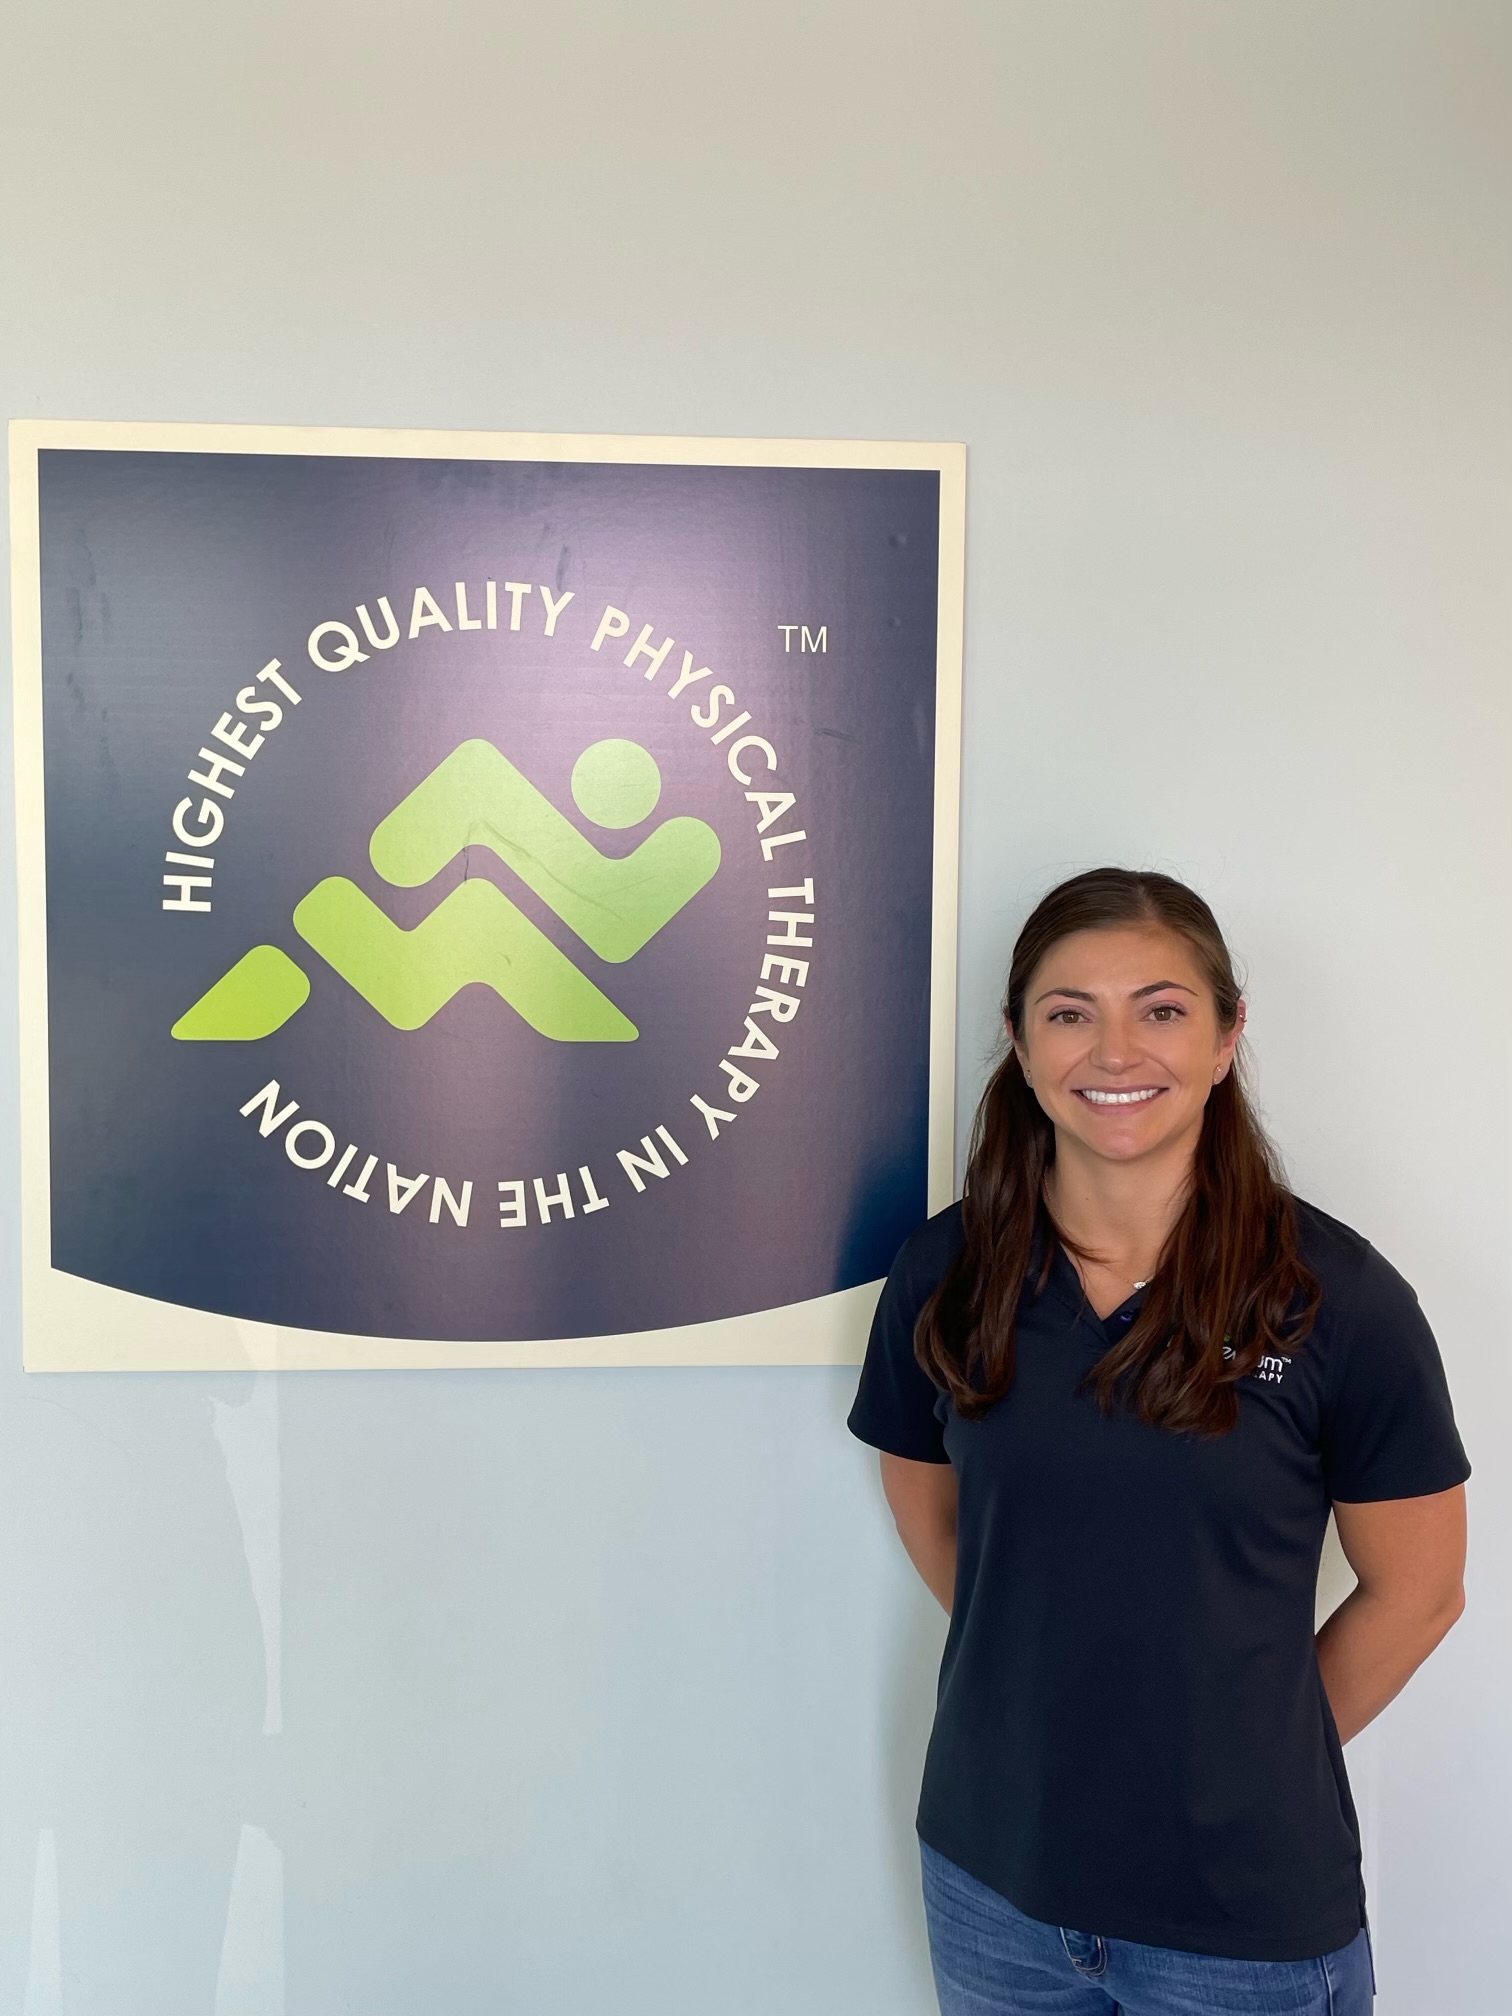 Gina Martinez in front of a sign for Momentum Physical Therapy